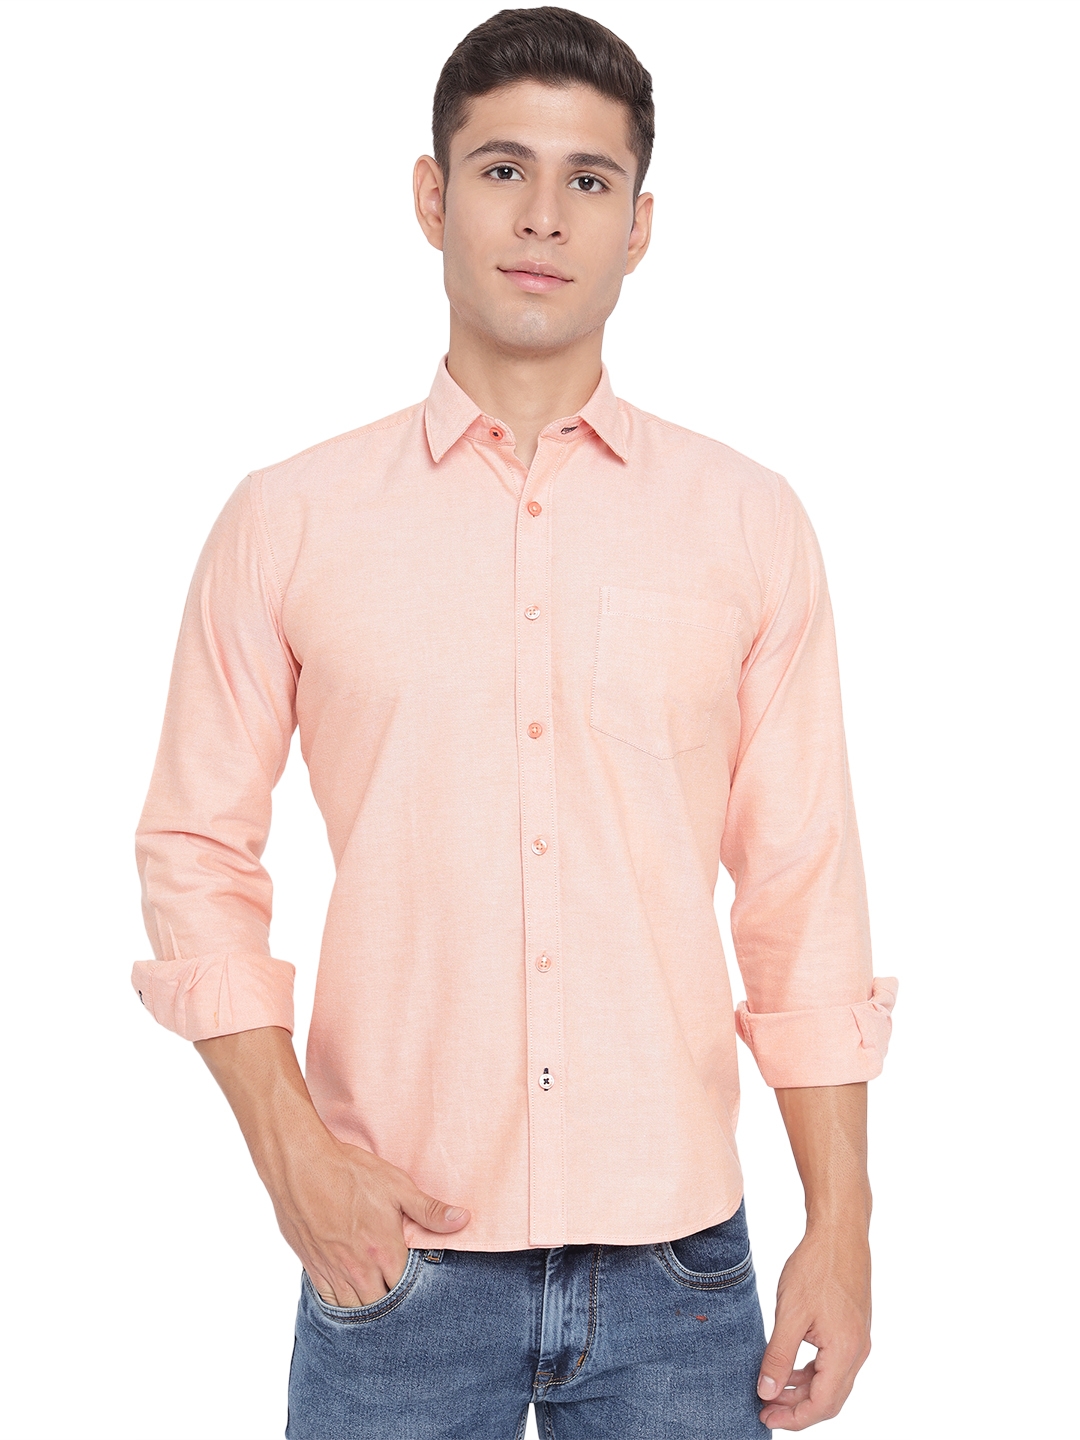 Greenfibre | Light Pink Solid Slim Fit Casual Shirt | Greenfibre